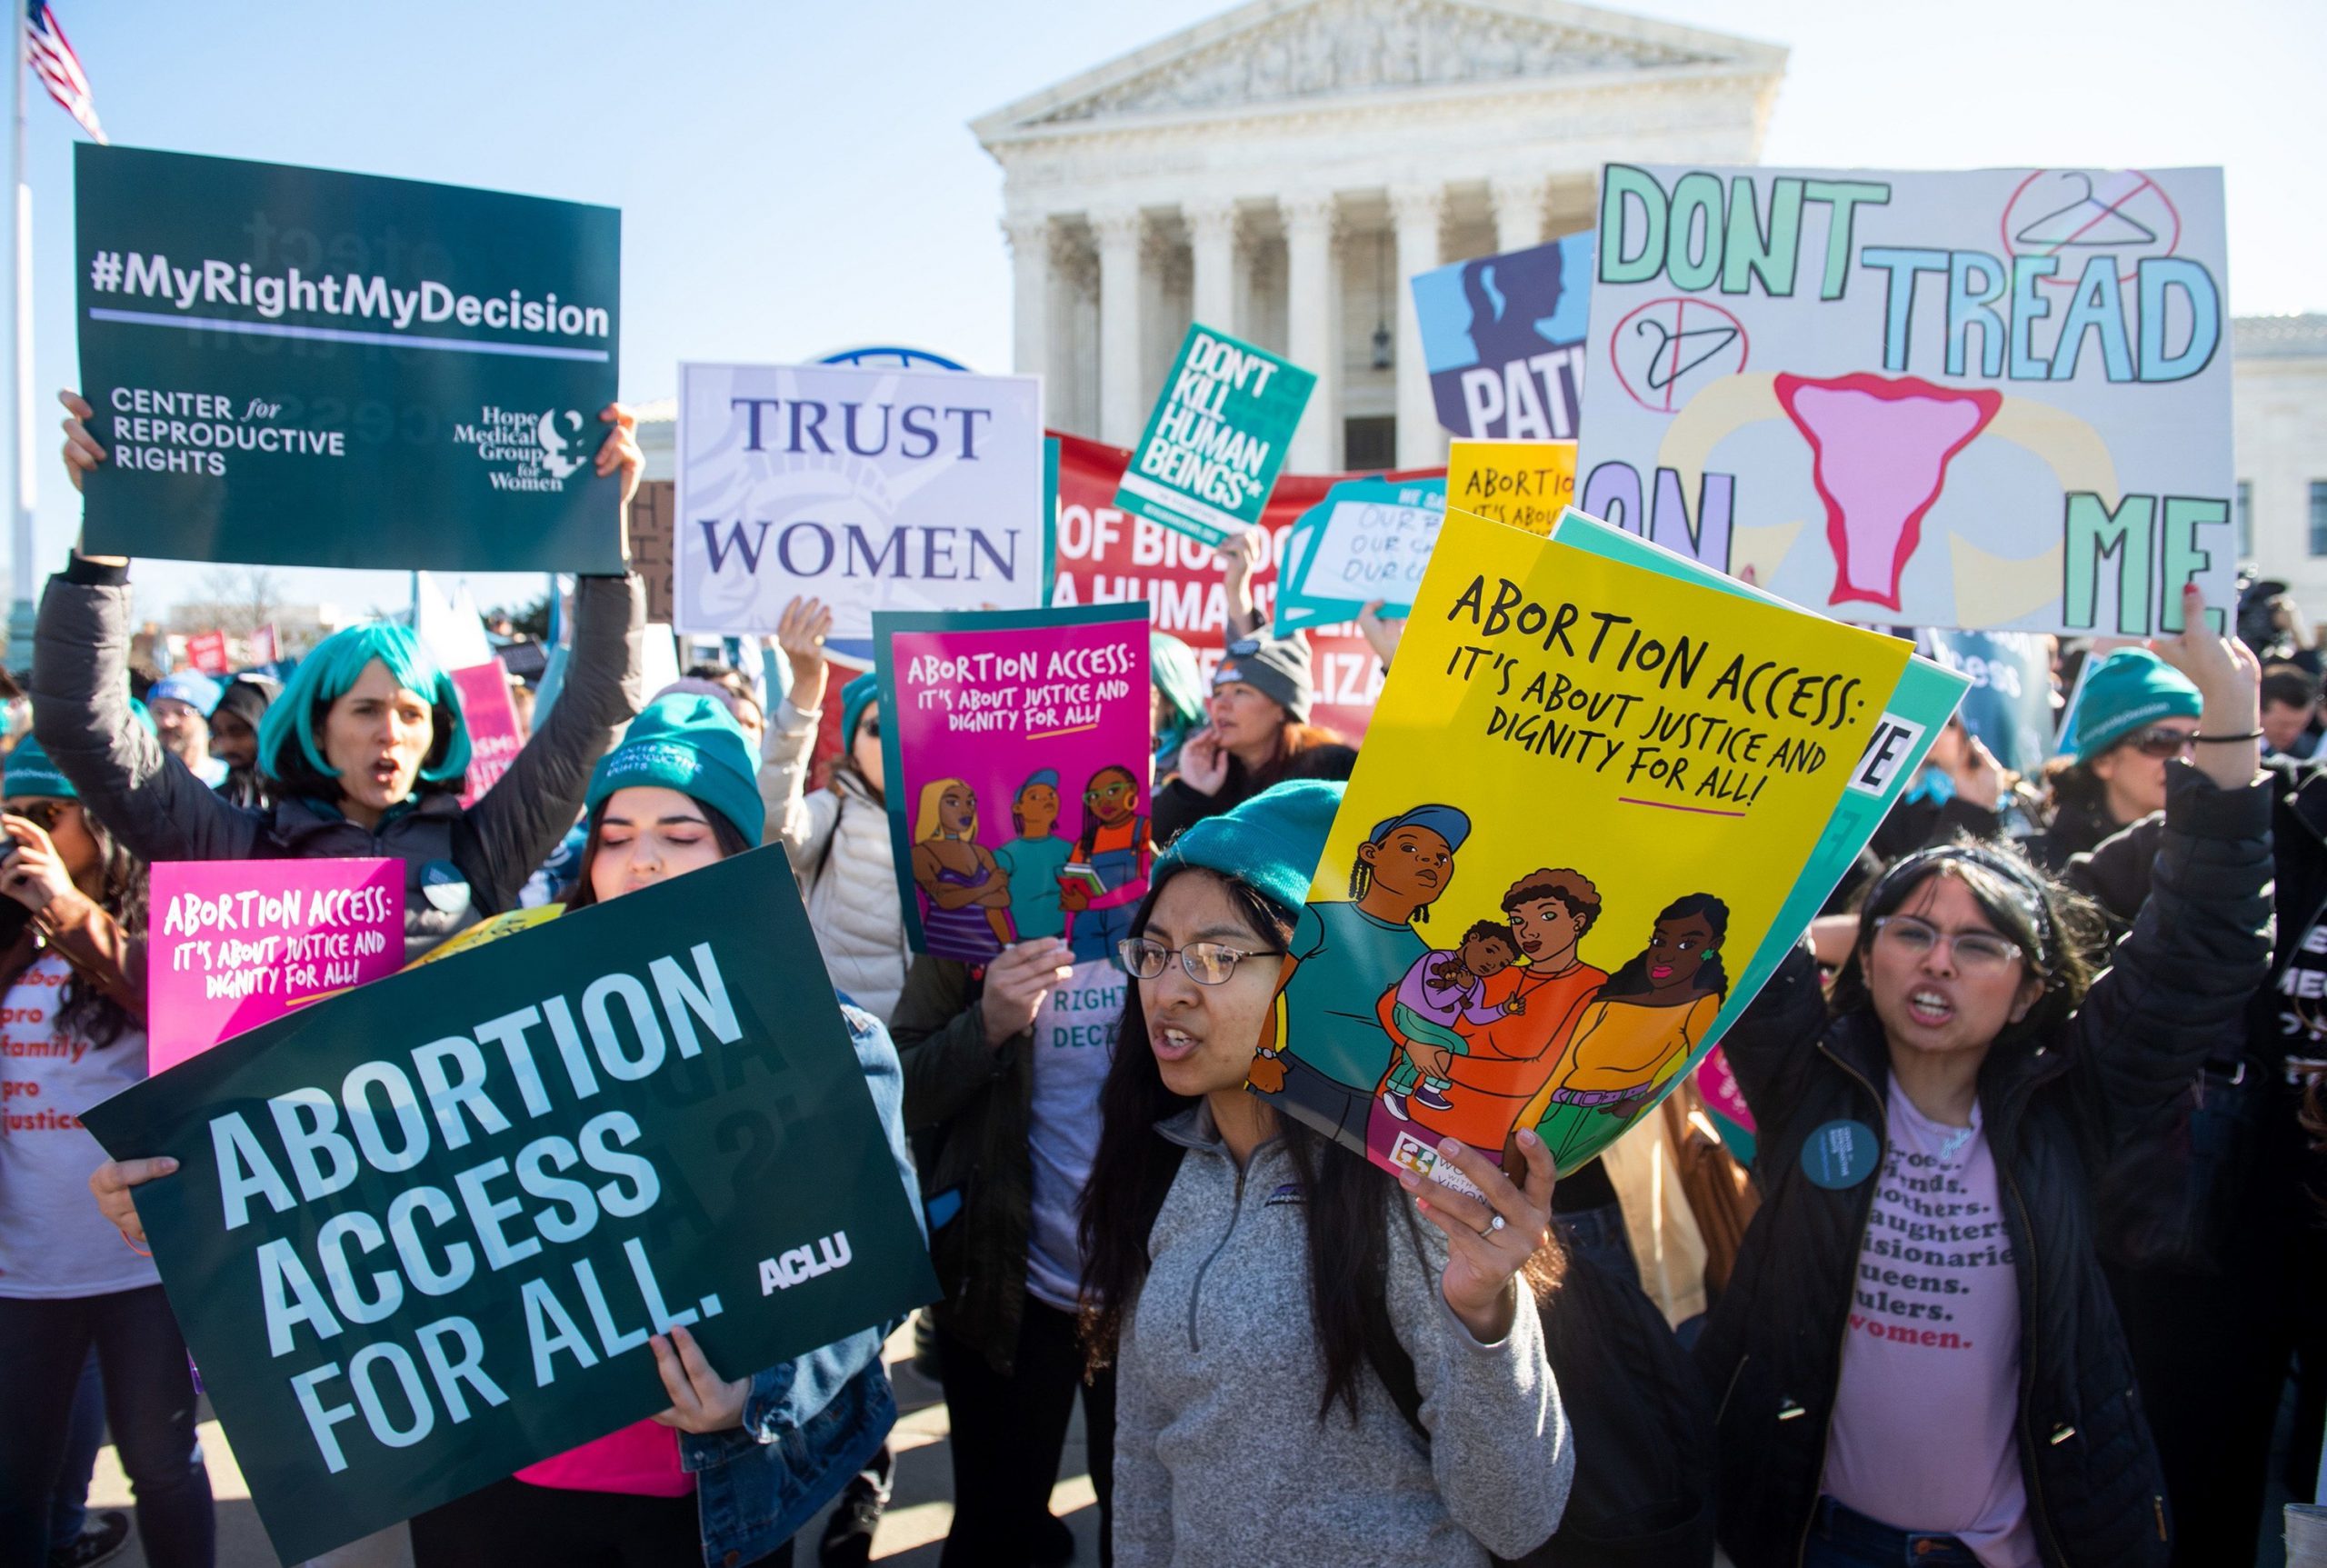 People at a pro-choice protest in front of a government building in Washington, D.C.